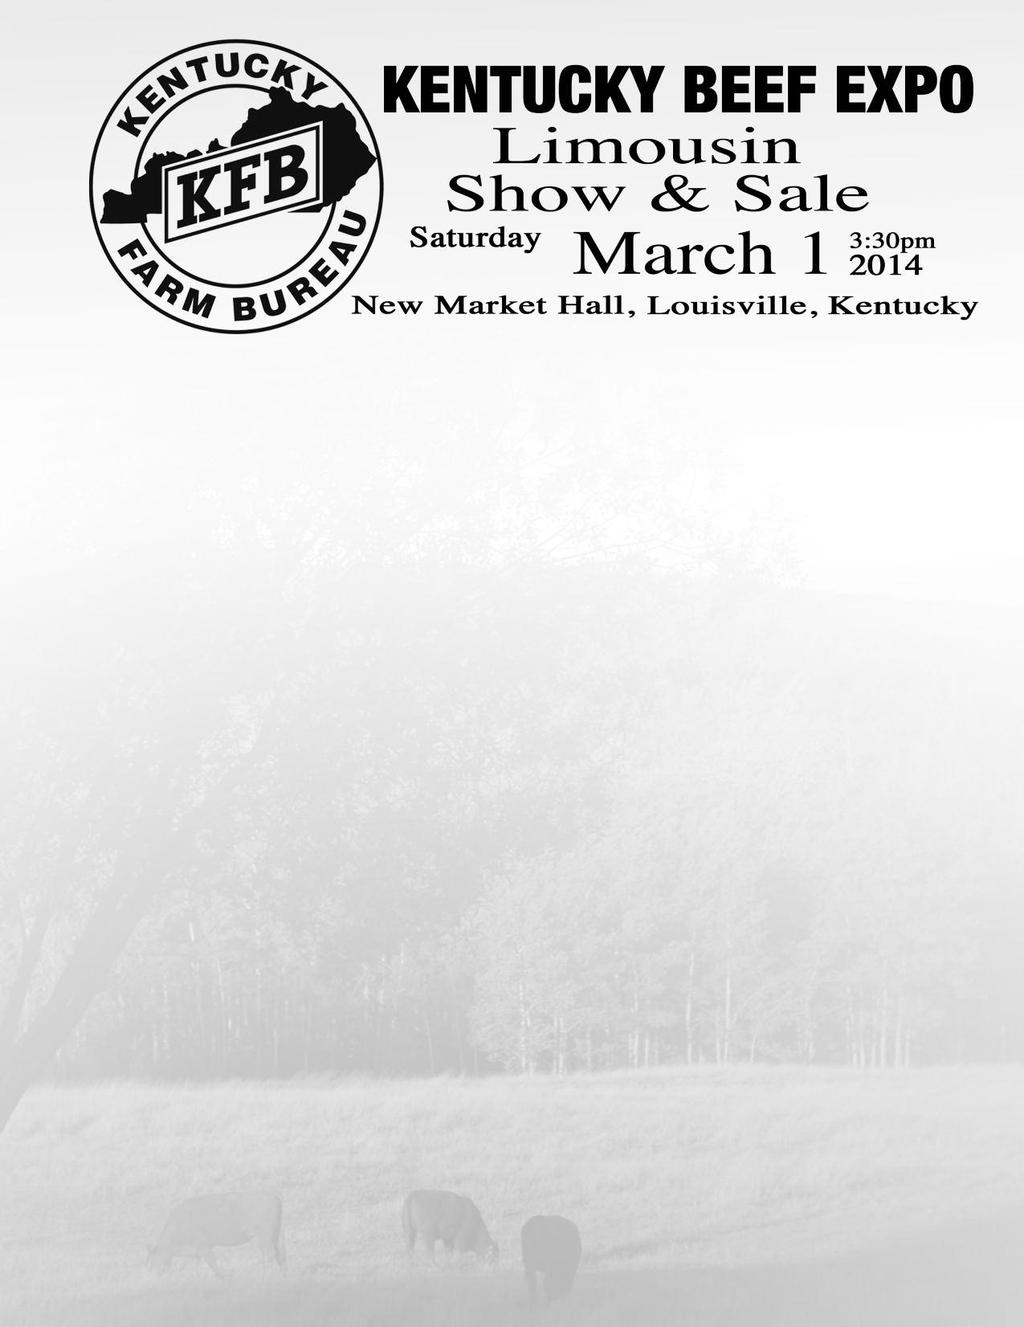 Sale Day Phones: 502-367-5472 or 817-821-6263 (Keith) Schedule of Limousin Events: Saturday, March 1, 2014 10:00 am Limousin Breed Show 3:30 pm Limousin Breed Sale Sunday, March 2, 2014 8:00 am Jr.